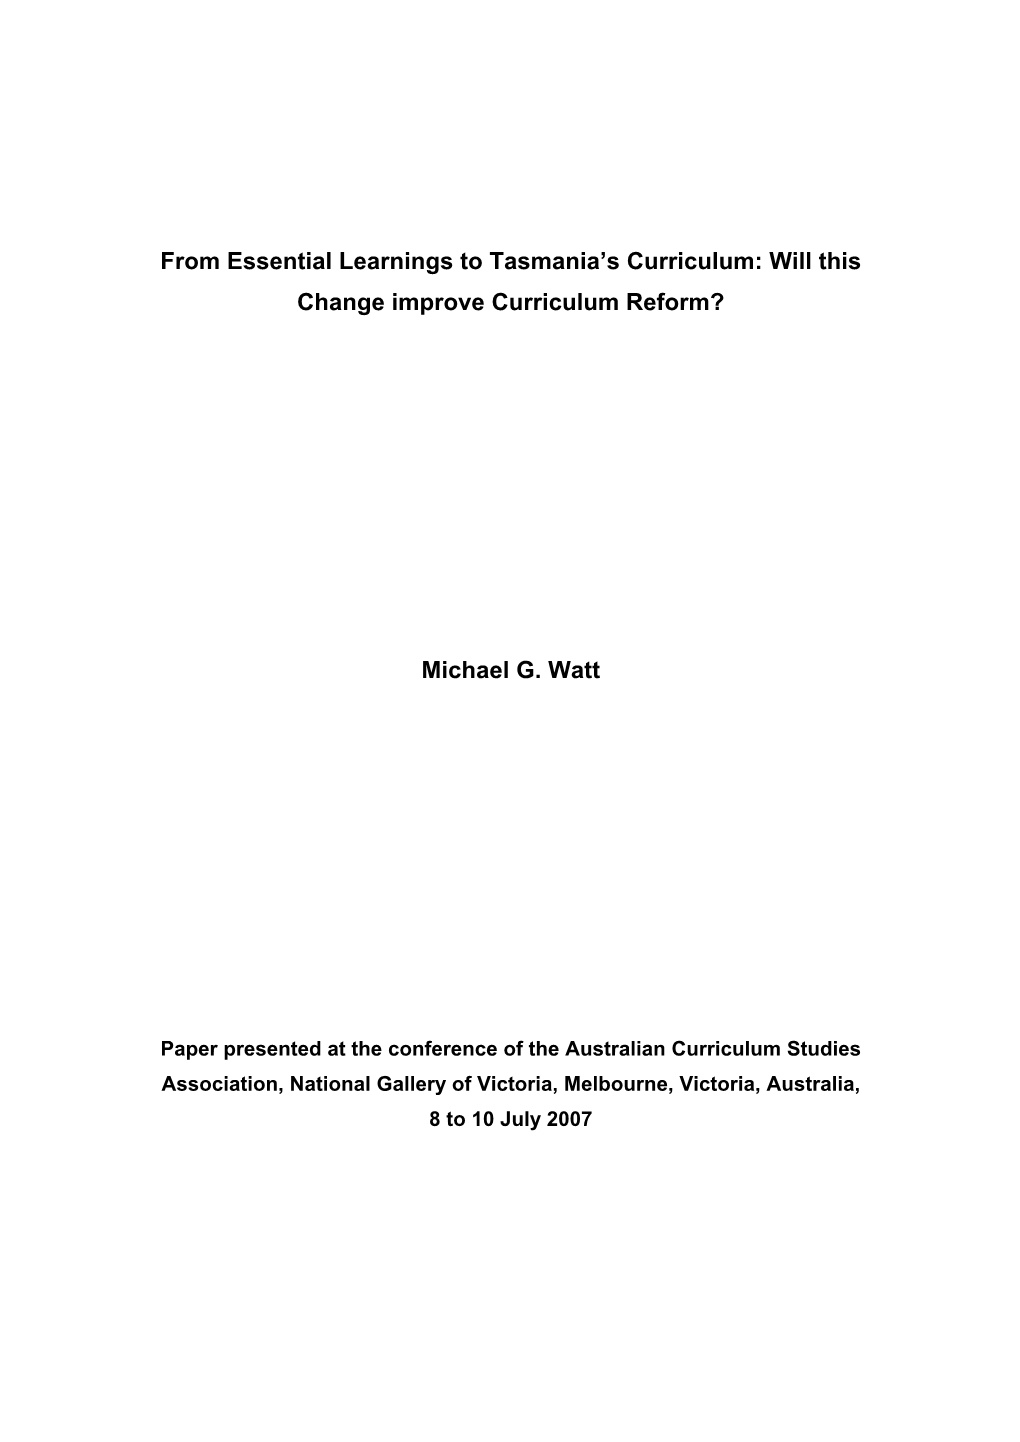 From Essential Learnings to Tasmania's Curriculum